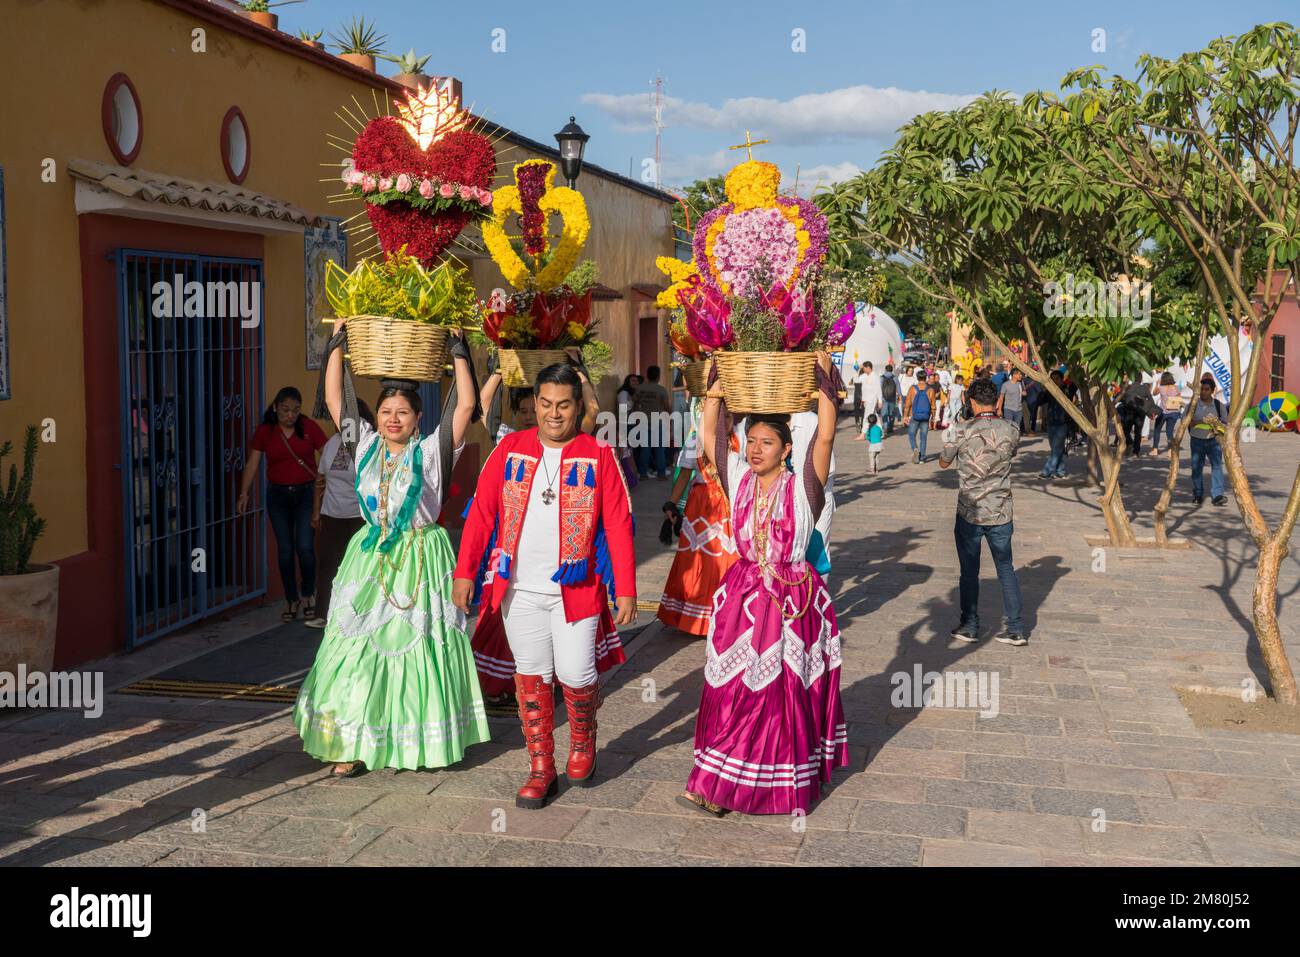 Chinas Oaxaquenas dancers with decorated flower baskets on their heads at the Guelaguetza festival in Oaxaca, Mexico. Stock Photo